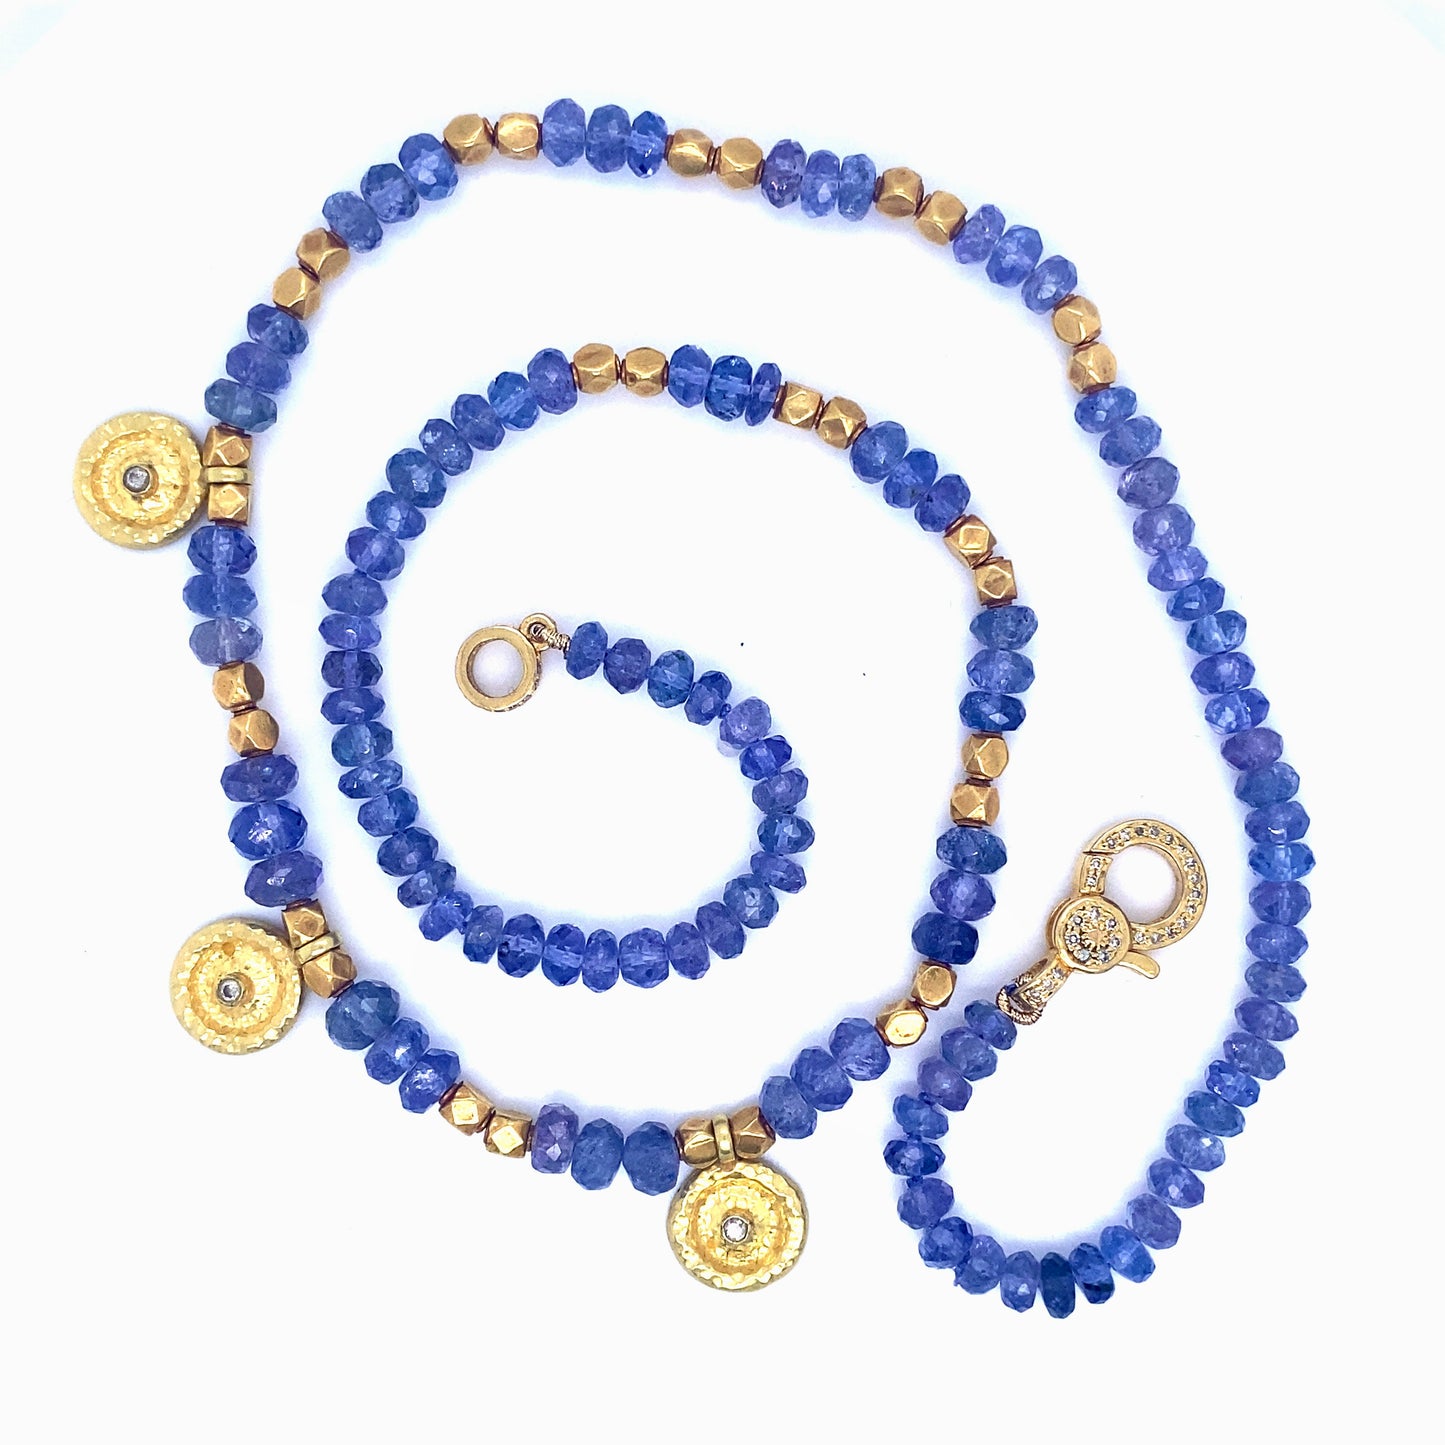 18kt Gold necklace and tanzanite beads with diamonds